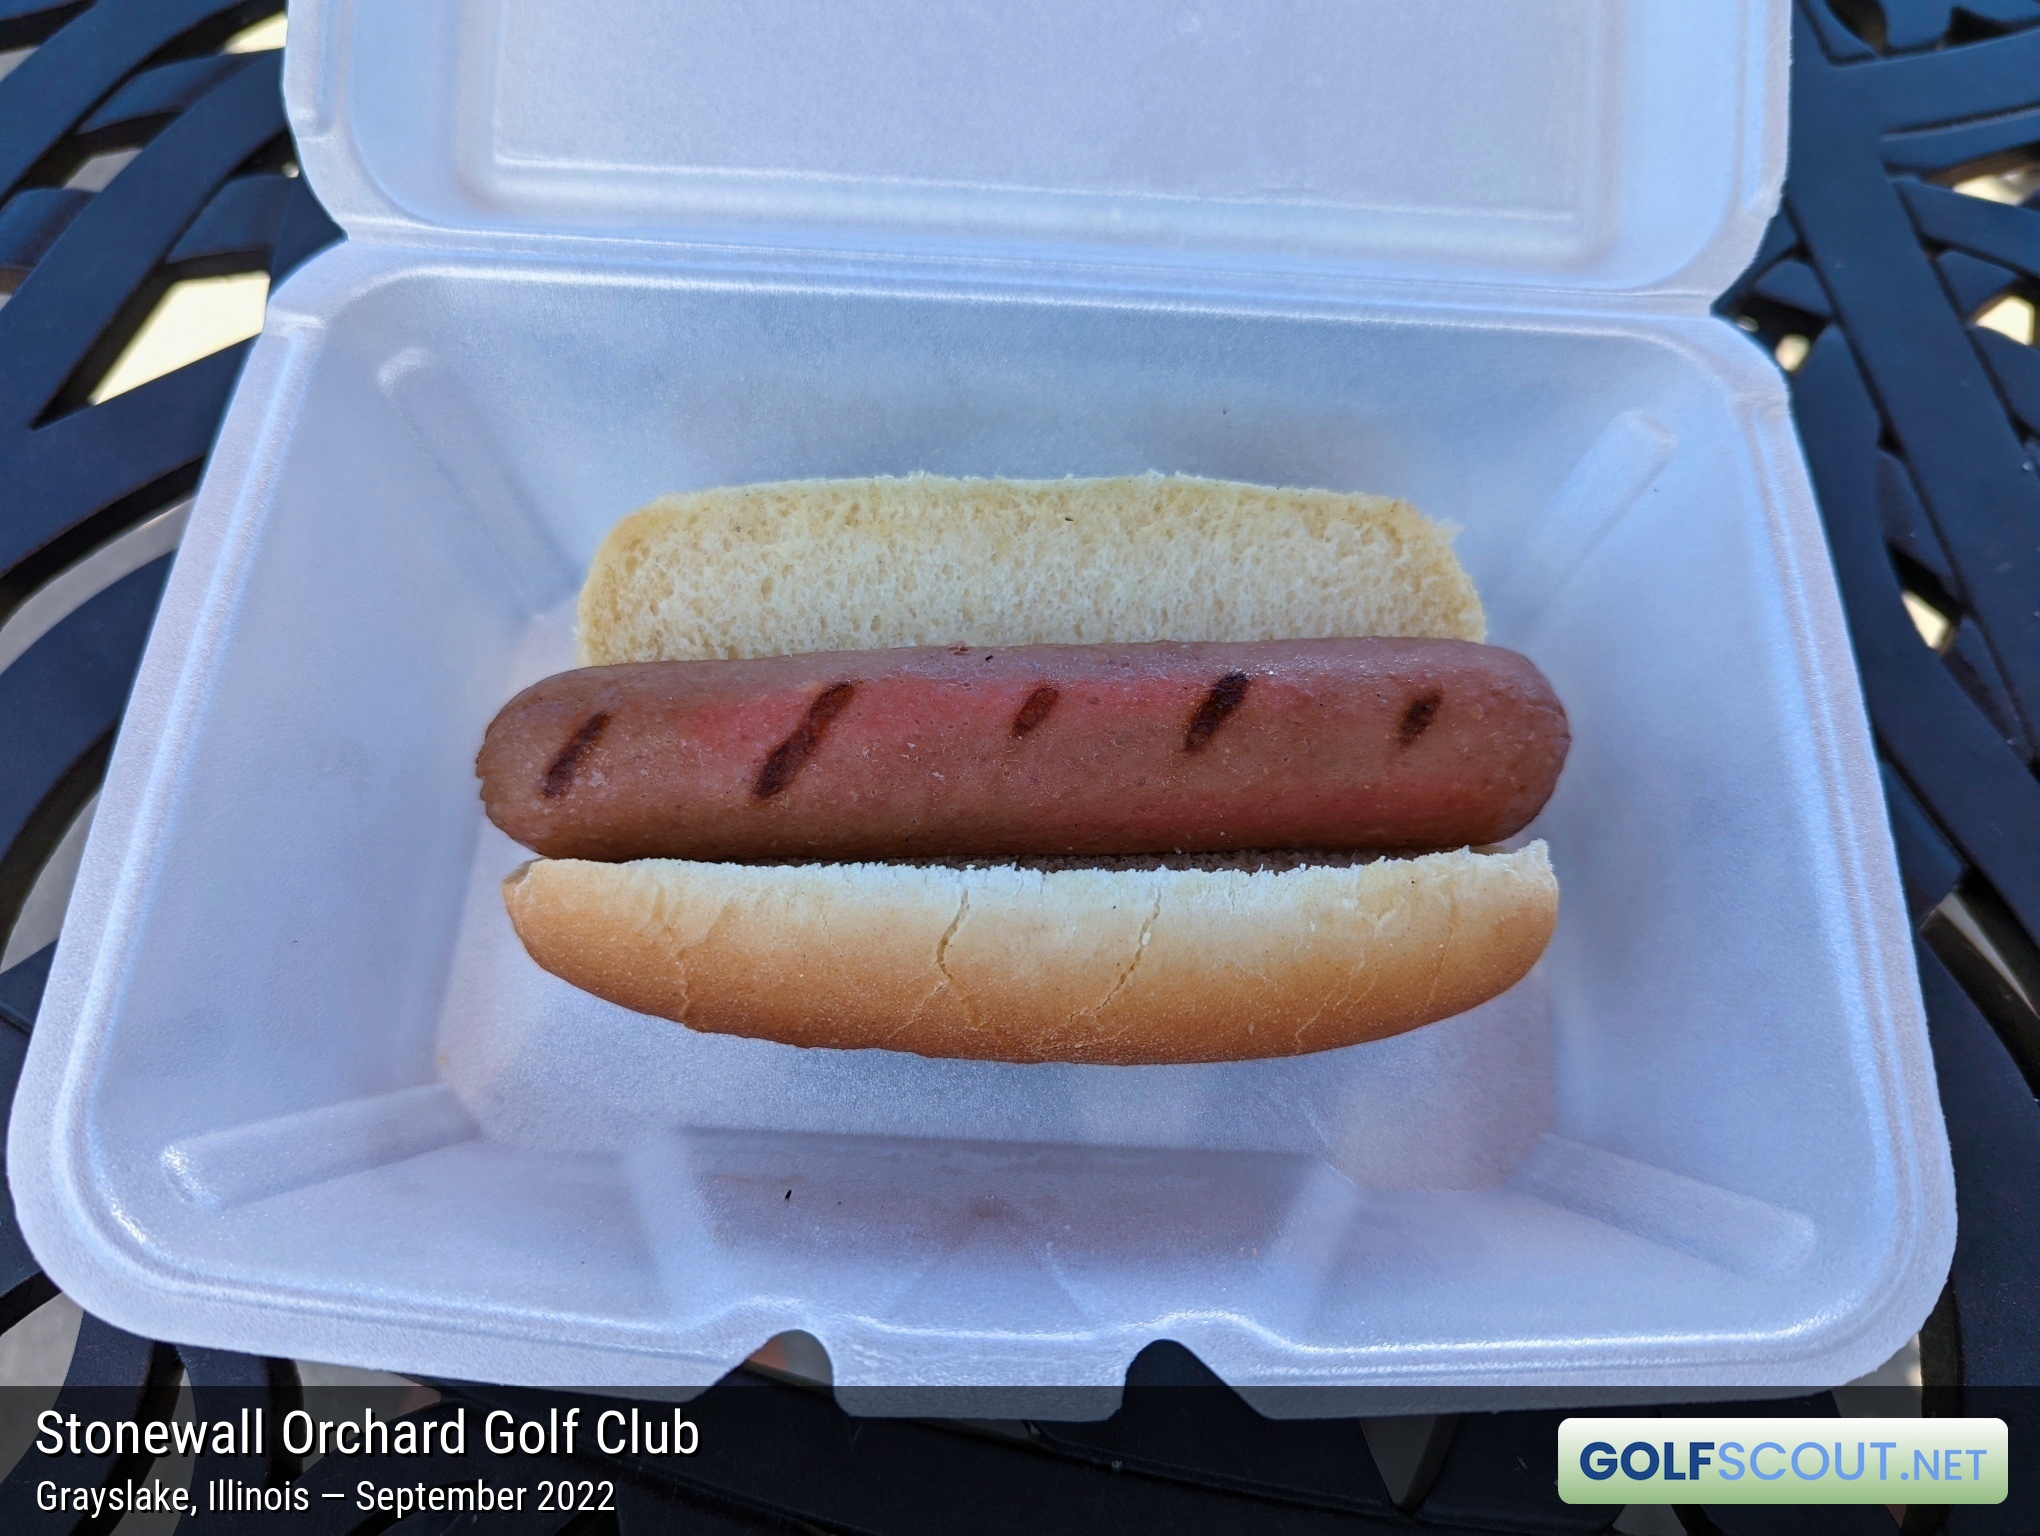 Photo of the food and dining at Stonewall Orchard Golf Club in Grayslake, Illinois. Photo of the hot dog at Stonewall Orchard Golf Club in Grayslake, Illinois.